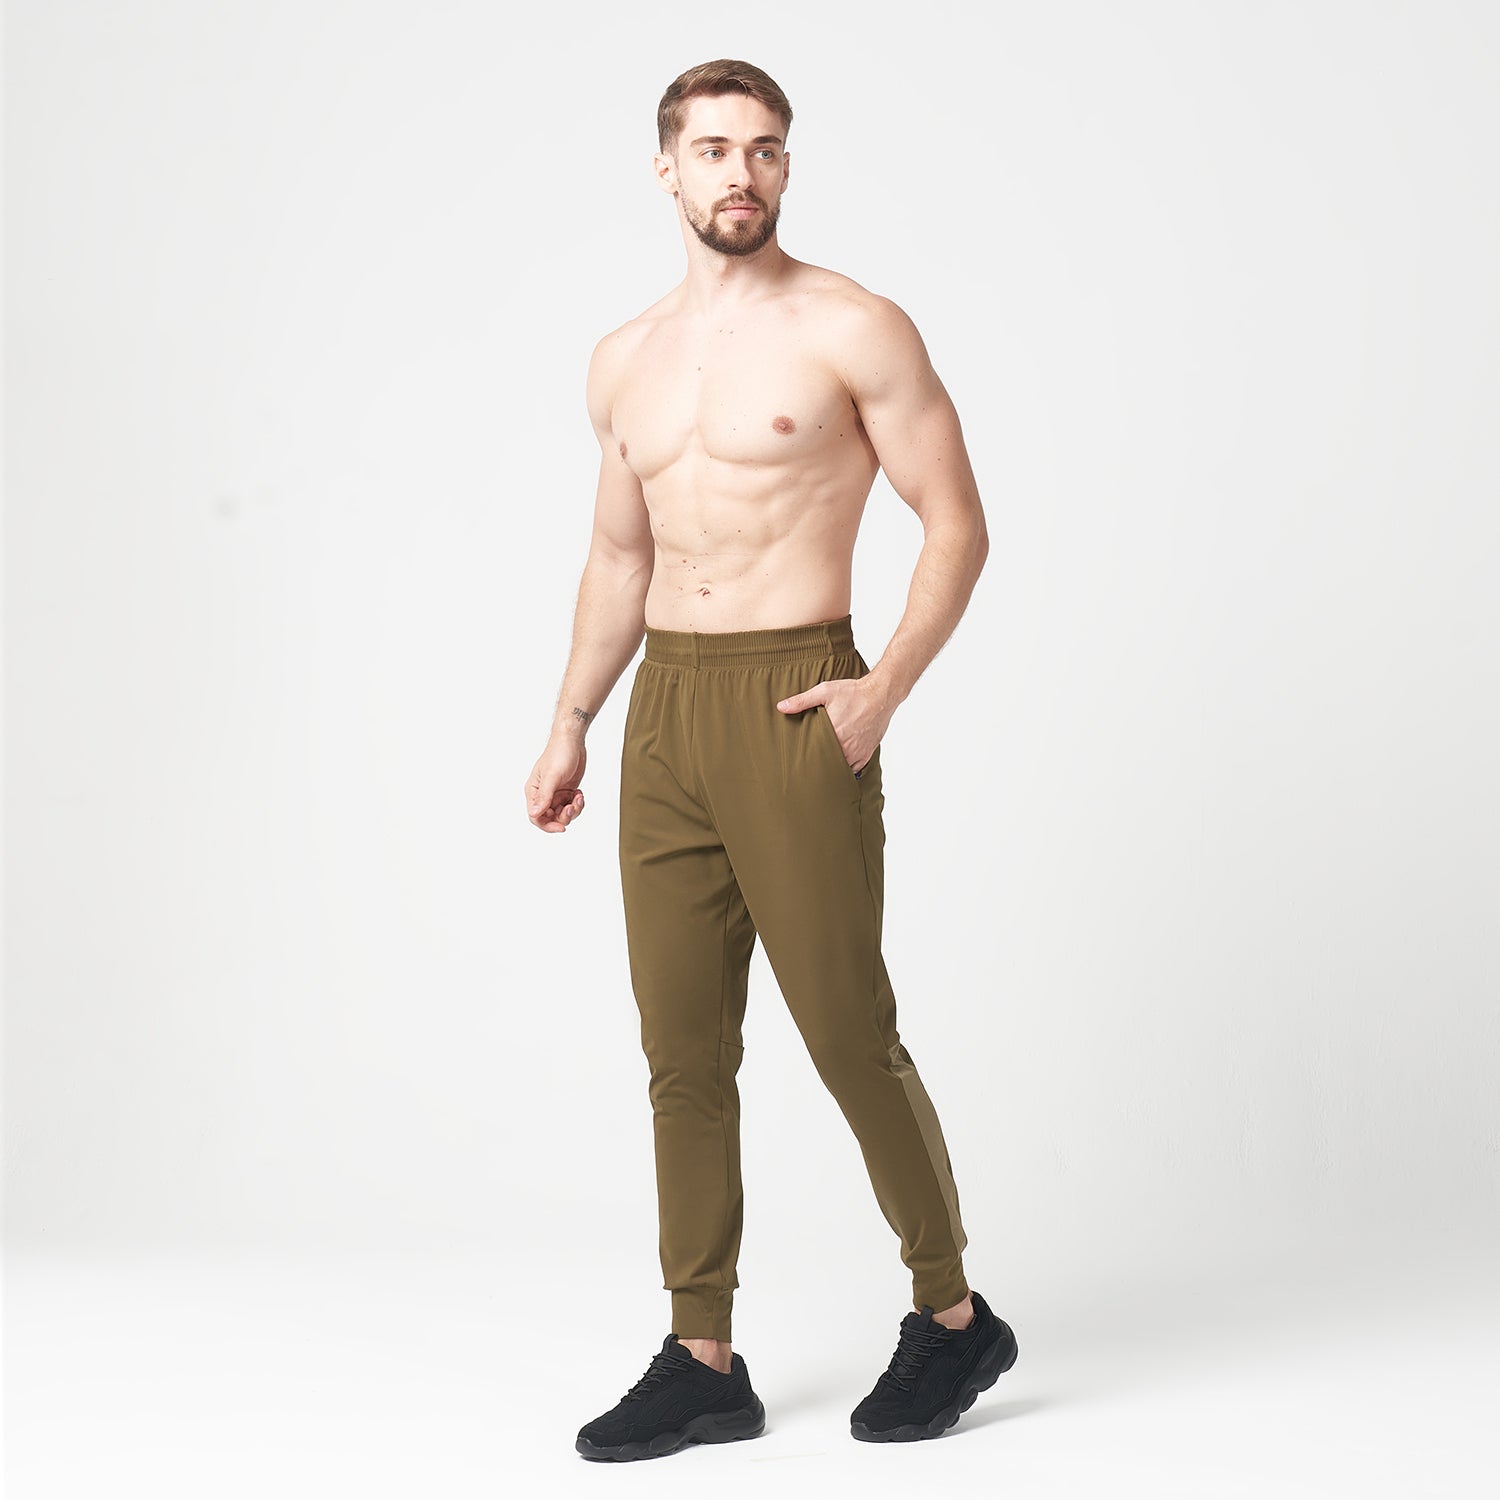 squatwolf-gym-wear-lab360-active-joggers-green-workout-pants-for-men